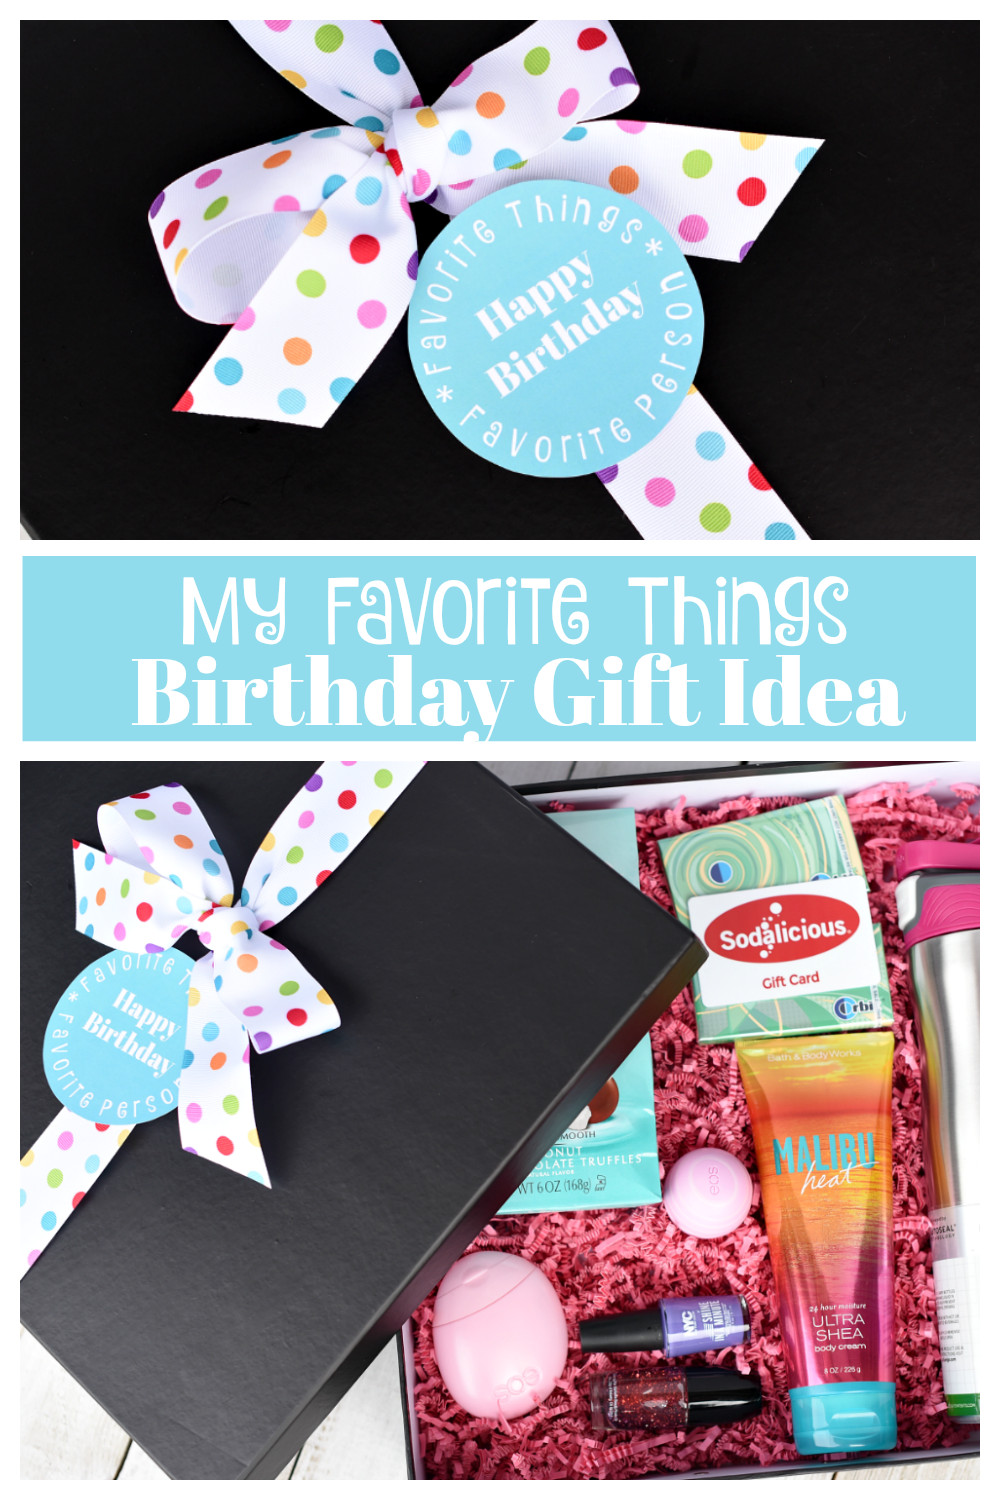 Useful Birthday Gifts
 My Favorite Things Birthday Gifts for Your Best Friend